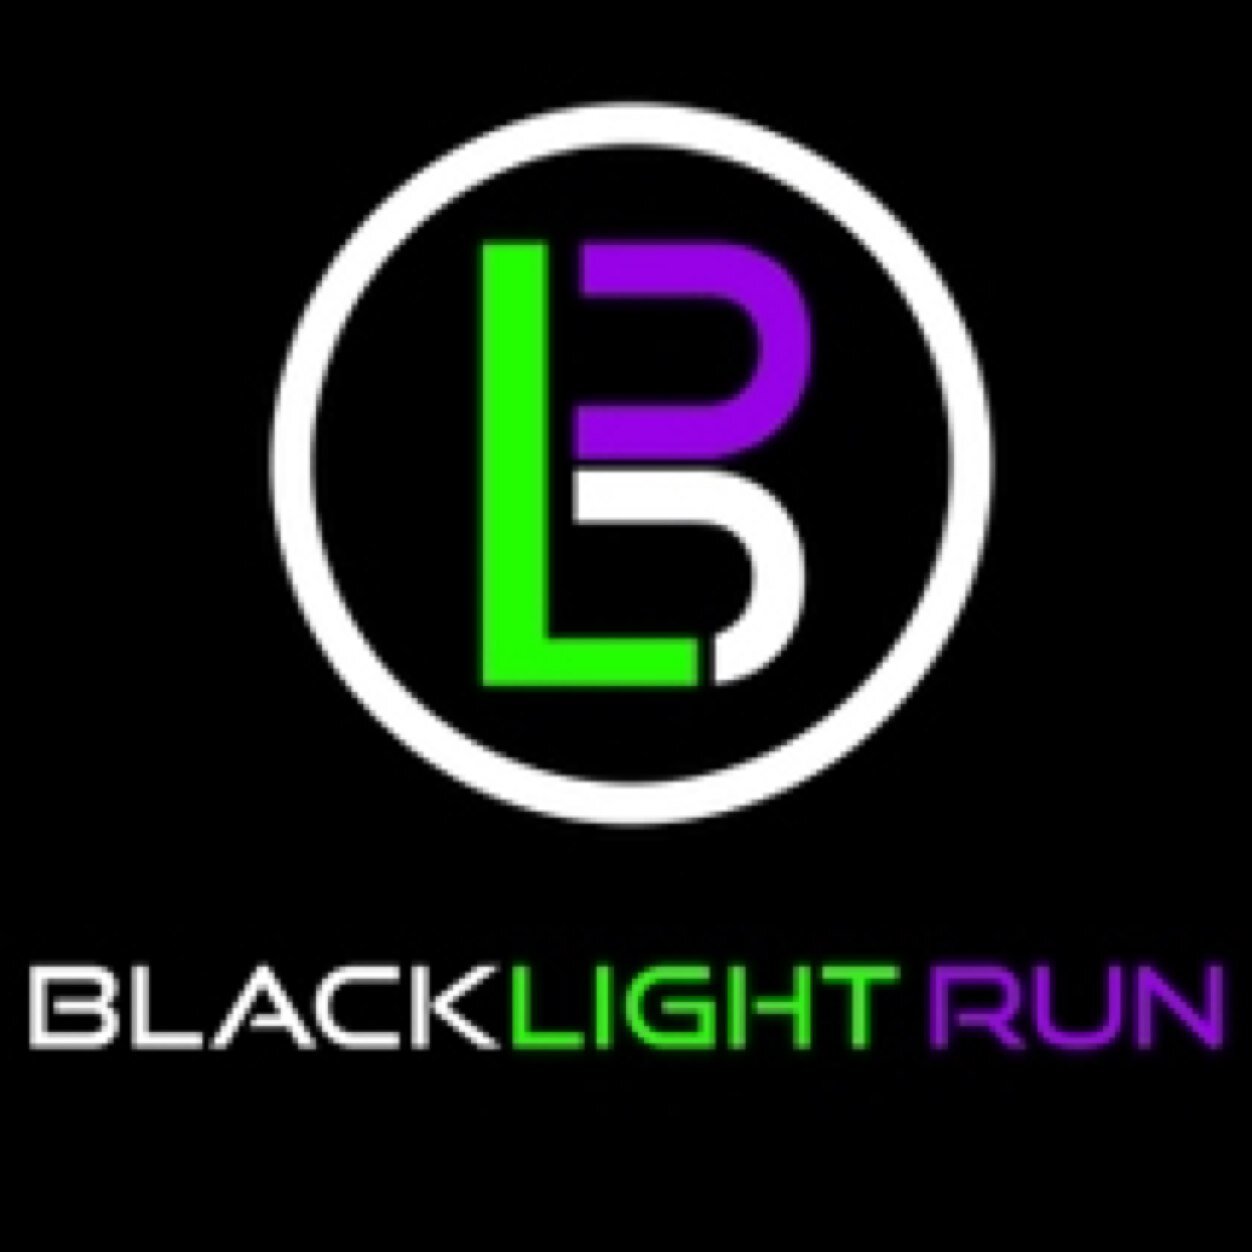 Blacklight Run is the Brightest 5K on the Planet! We're excited to be in CANADA! Find out all of our dates at http://t.co/amMIGBZ3vP